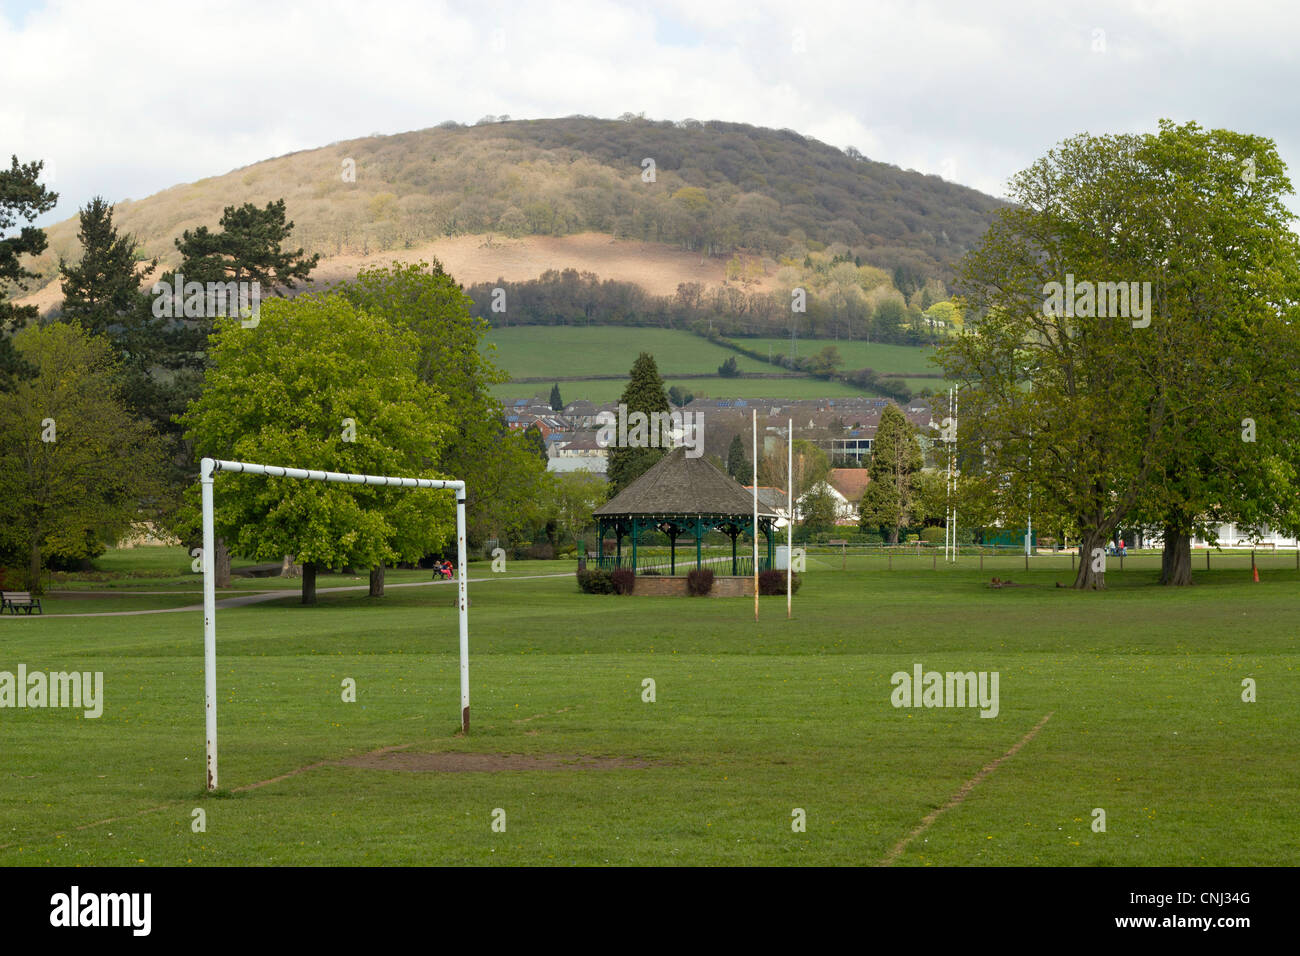 Football and Rugby goal posts in Bailey Park Abergavenny, Wales UK. Stock Photo